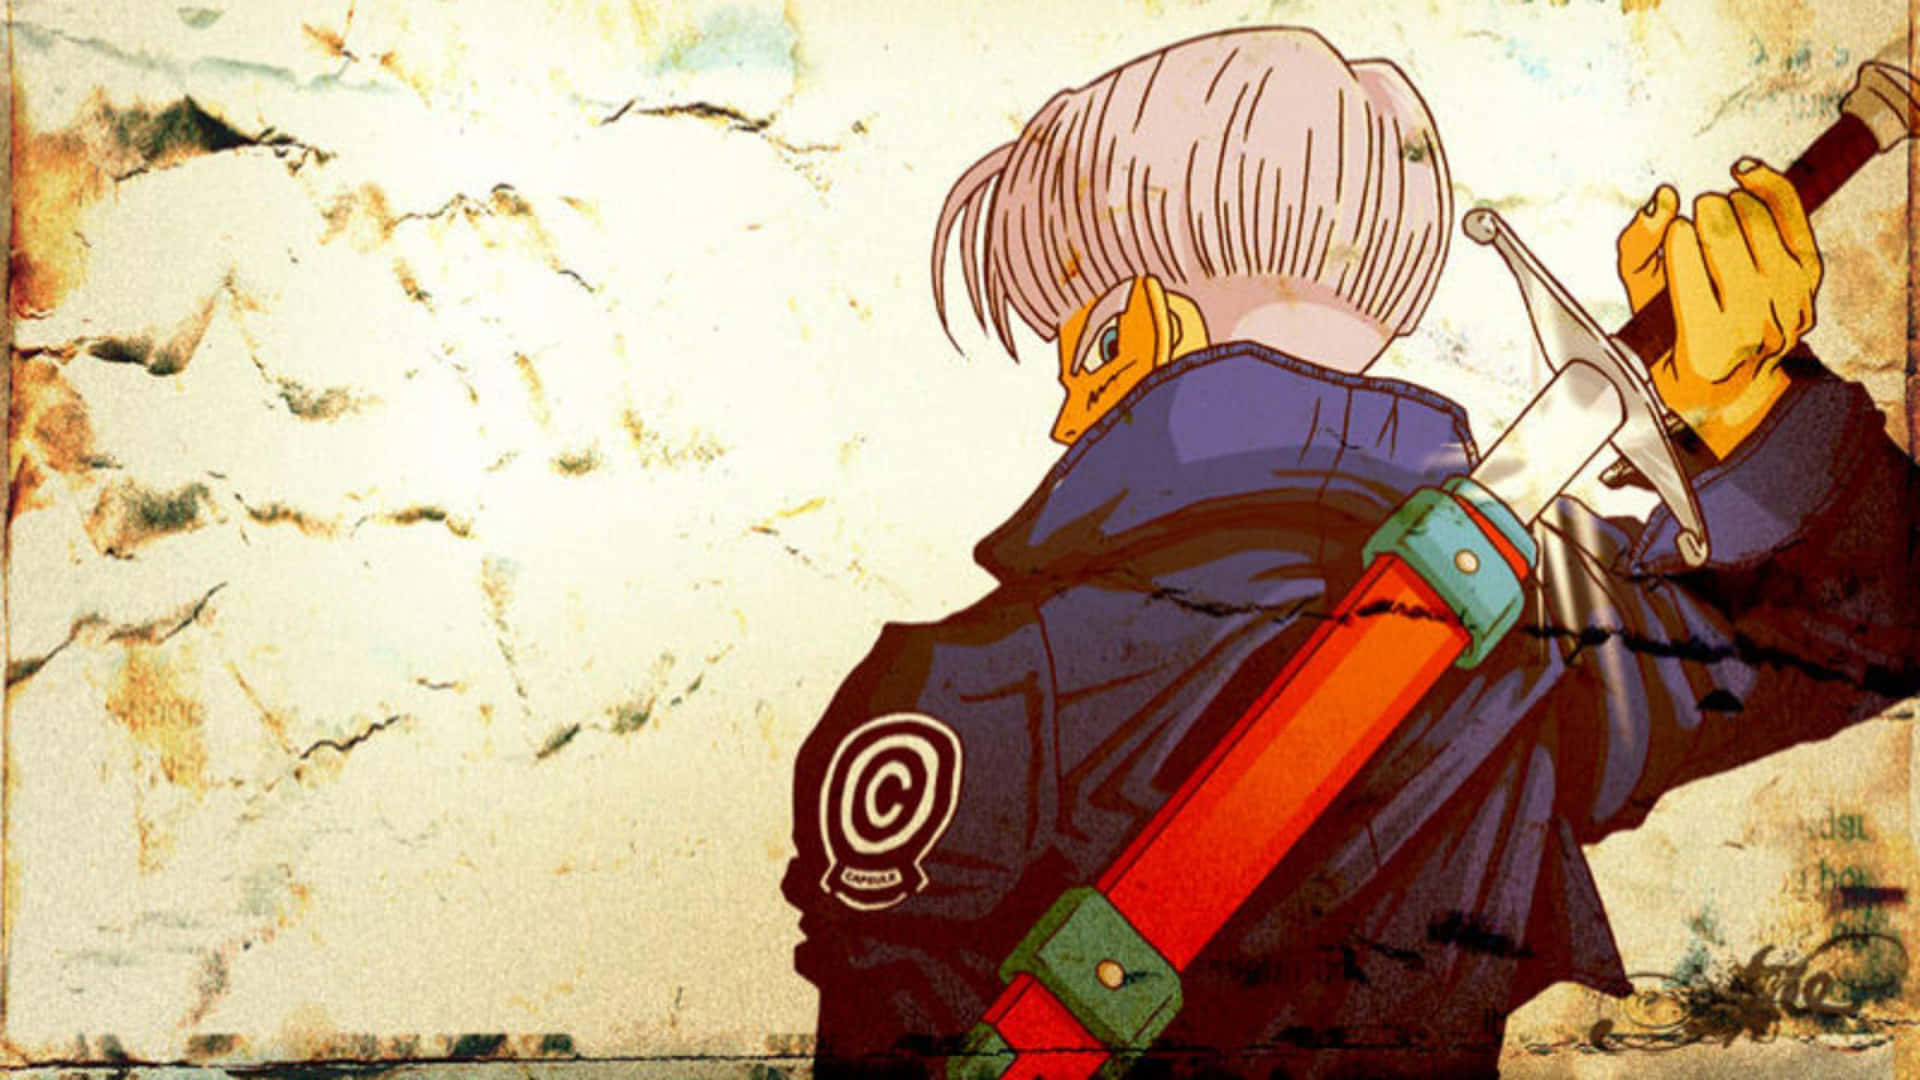 Trunks Getting Sword From His Back